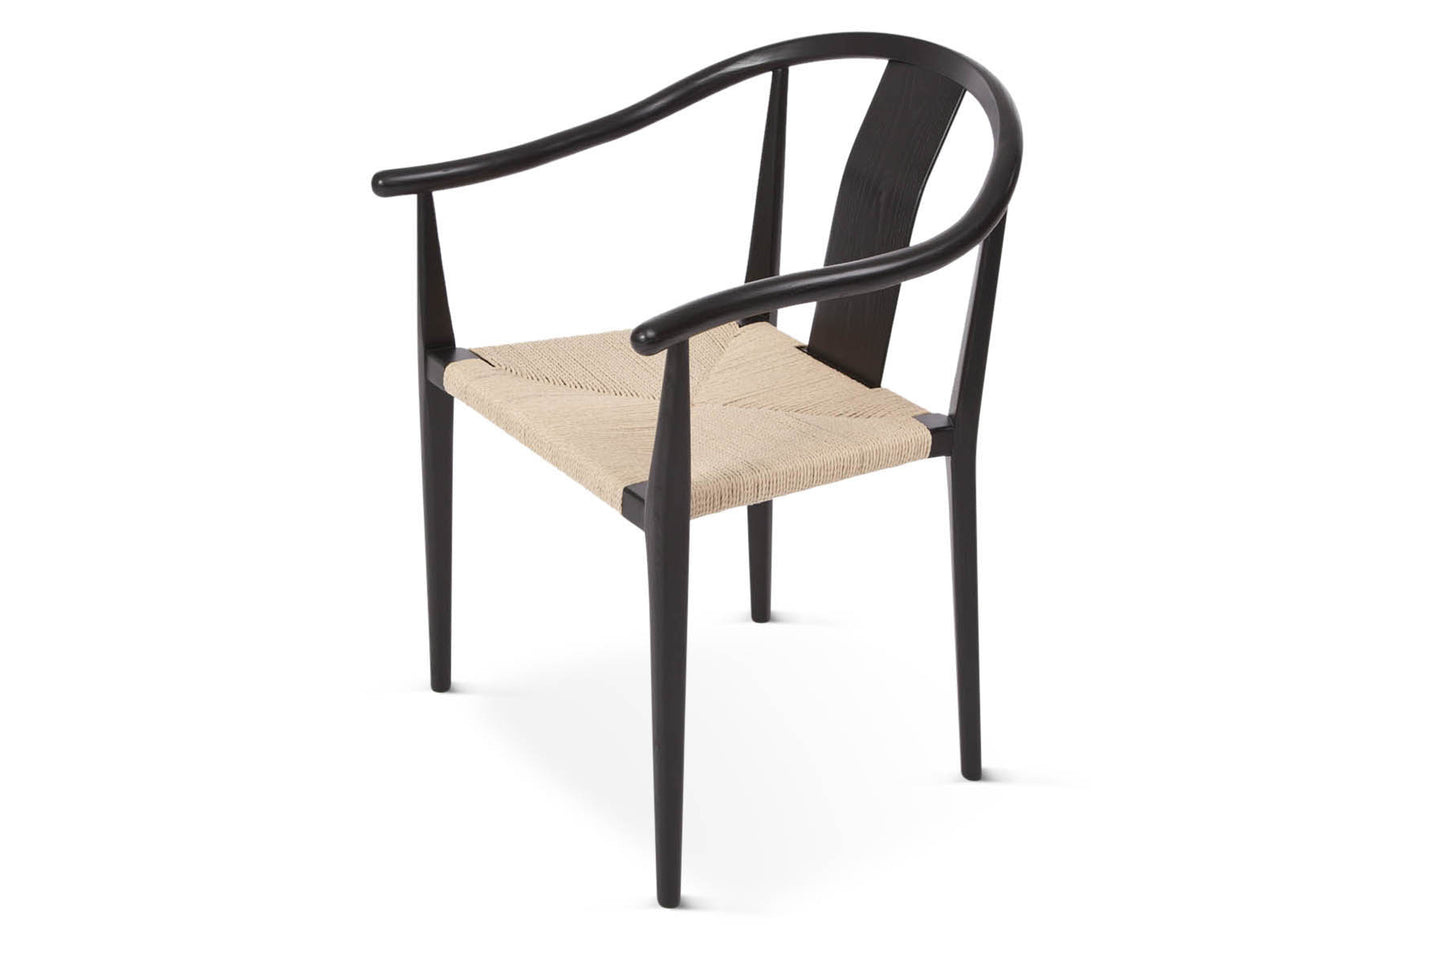 Shanghai Dining Chair by NORR11